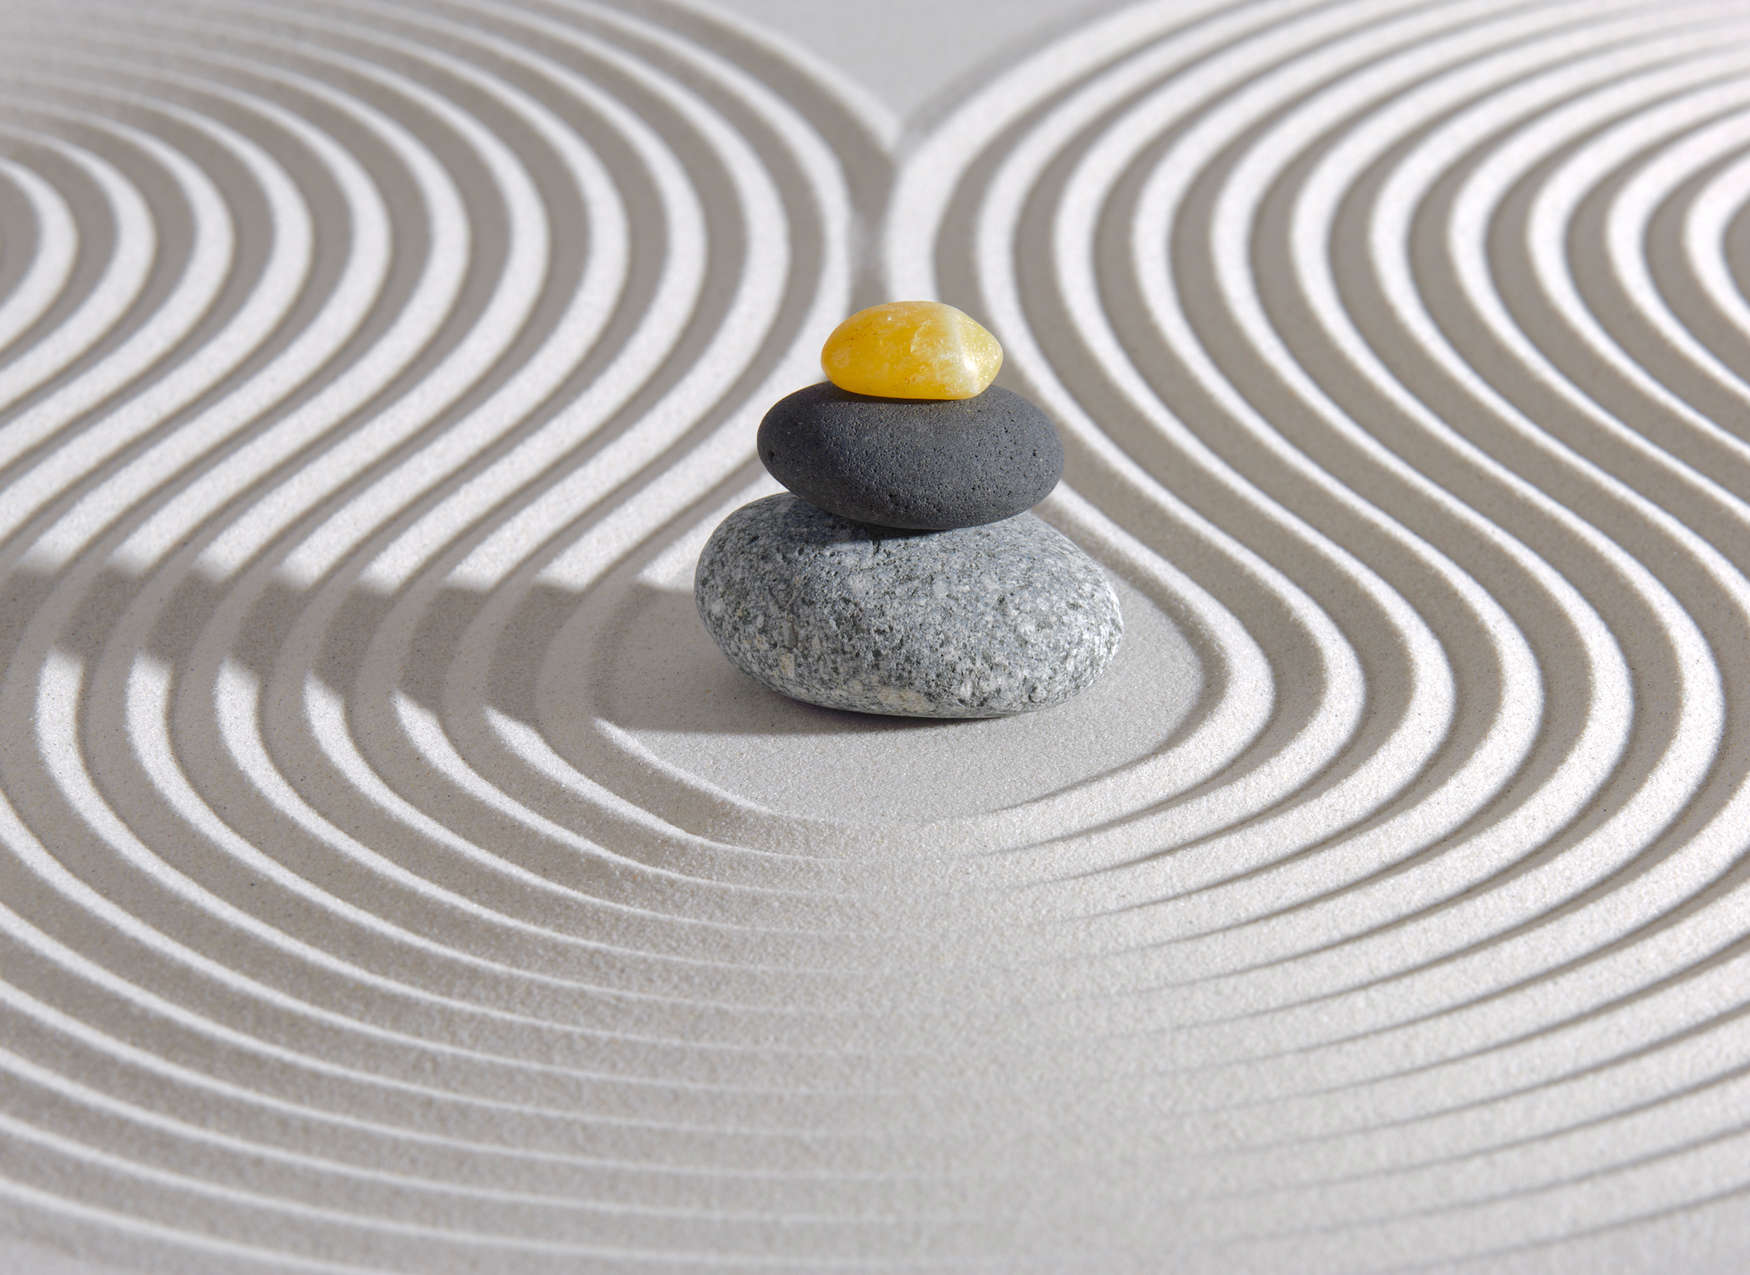             Spa Stone Tower in the Sand Wall Art Wallpaper - Yellow, Grey, Beige
        